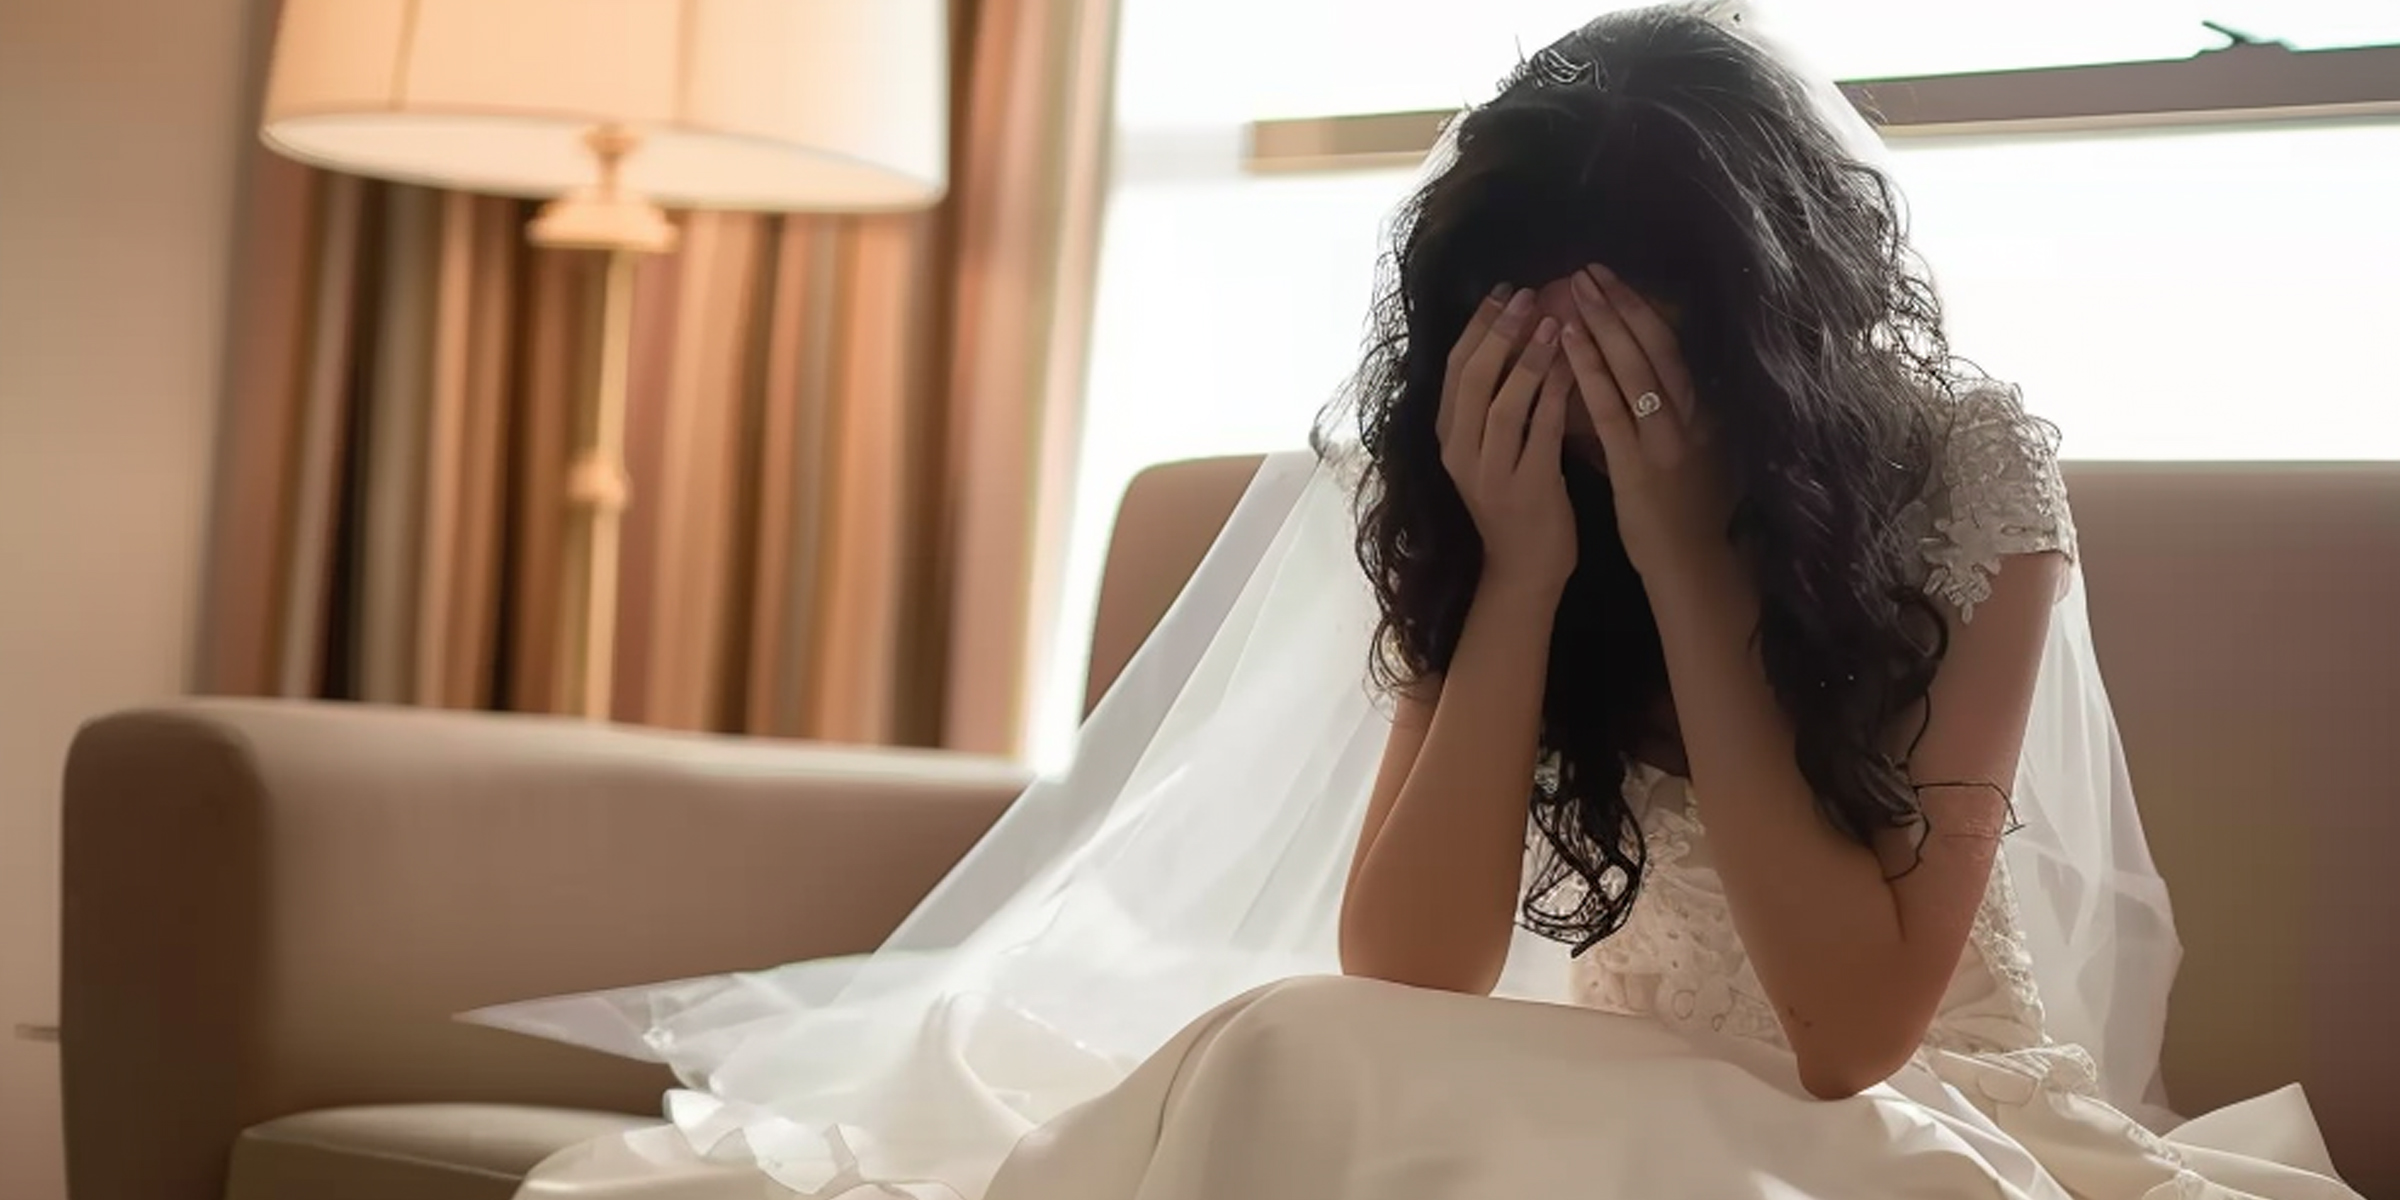 A bride covers her face with her hands | Source: AmoMama